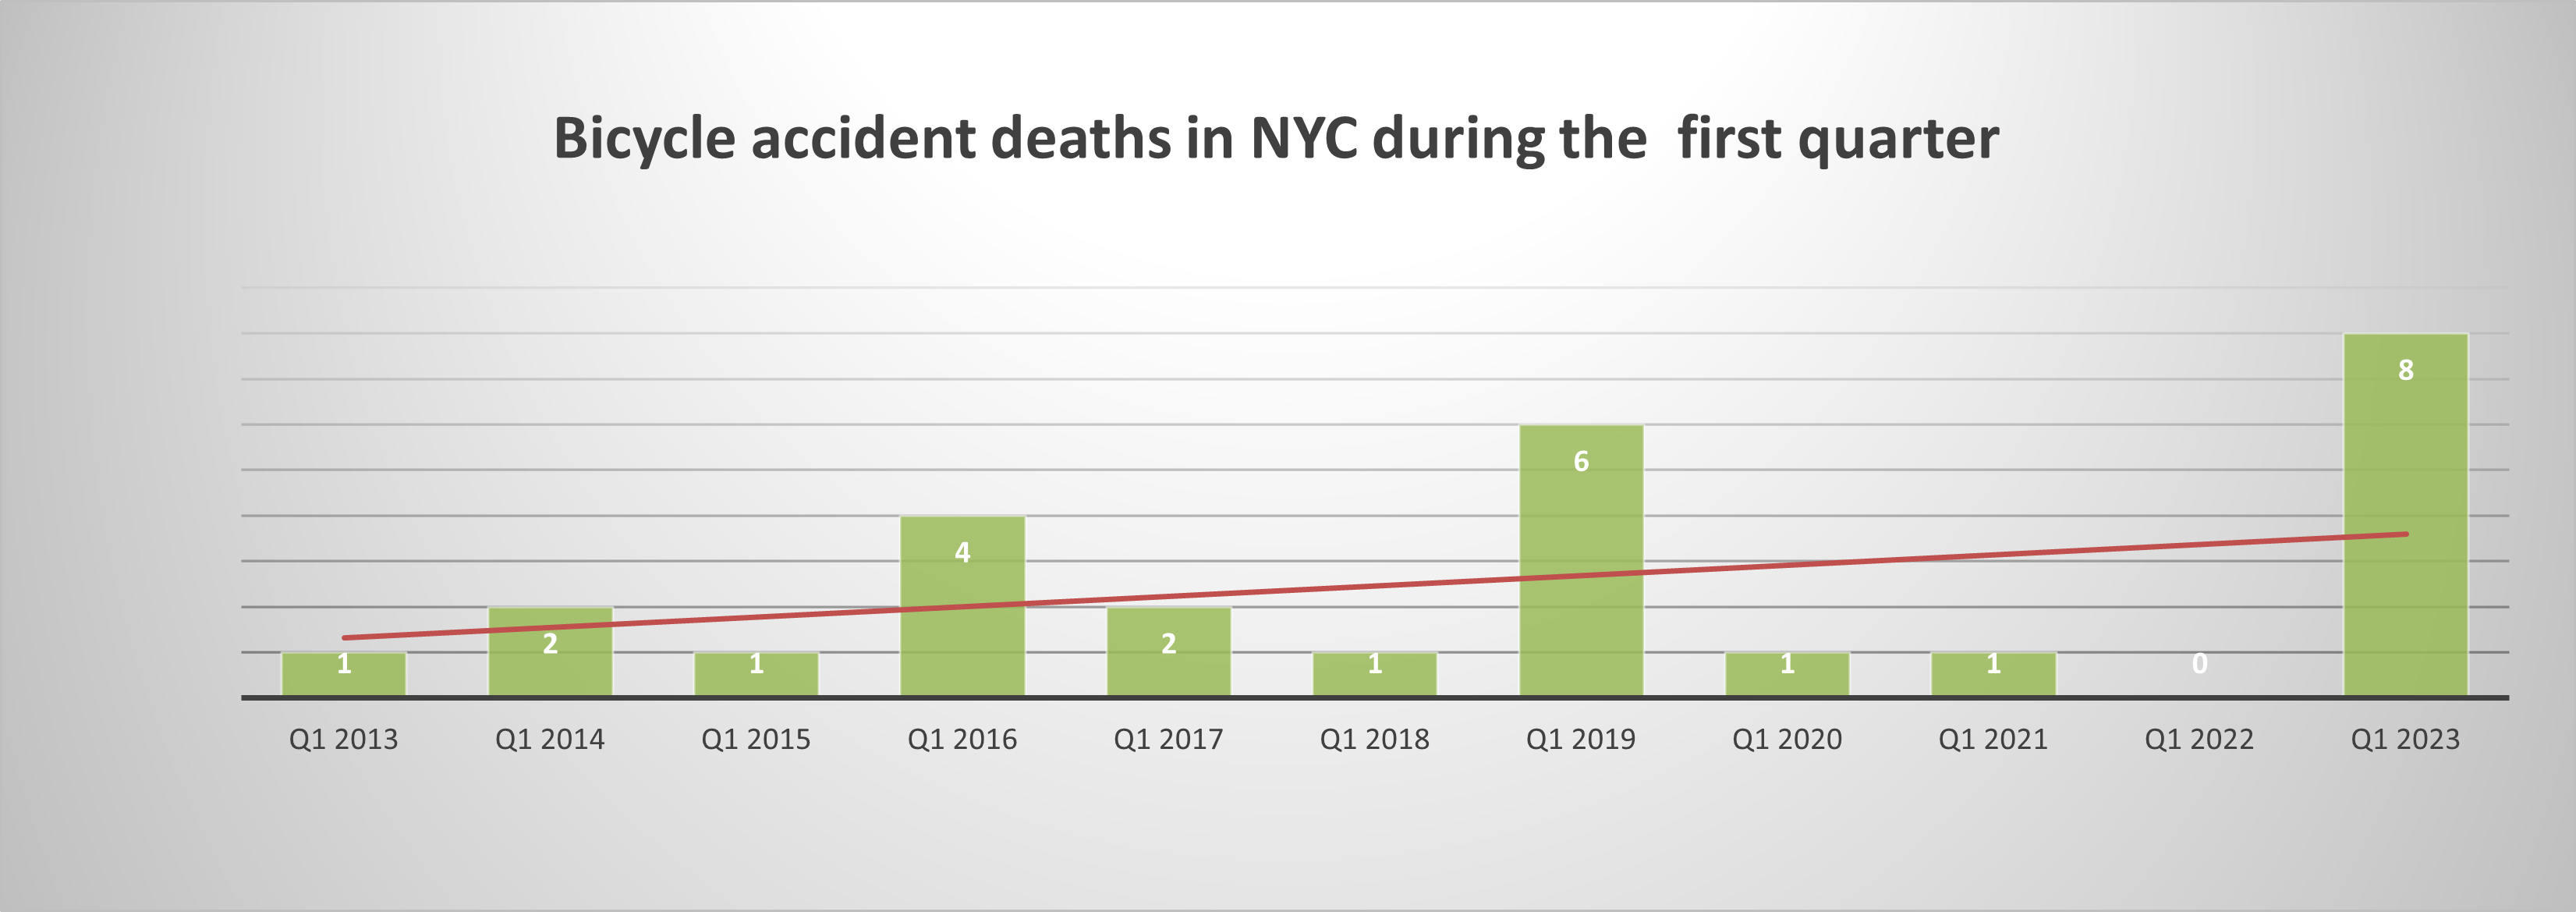 Bicycle accident deaths NYC Q1 2023